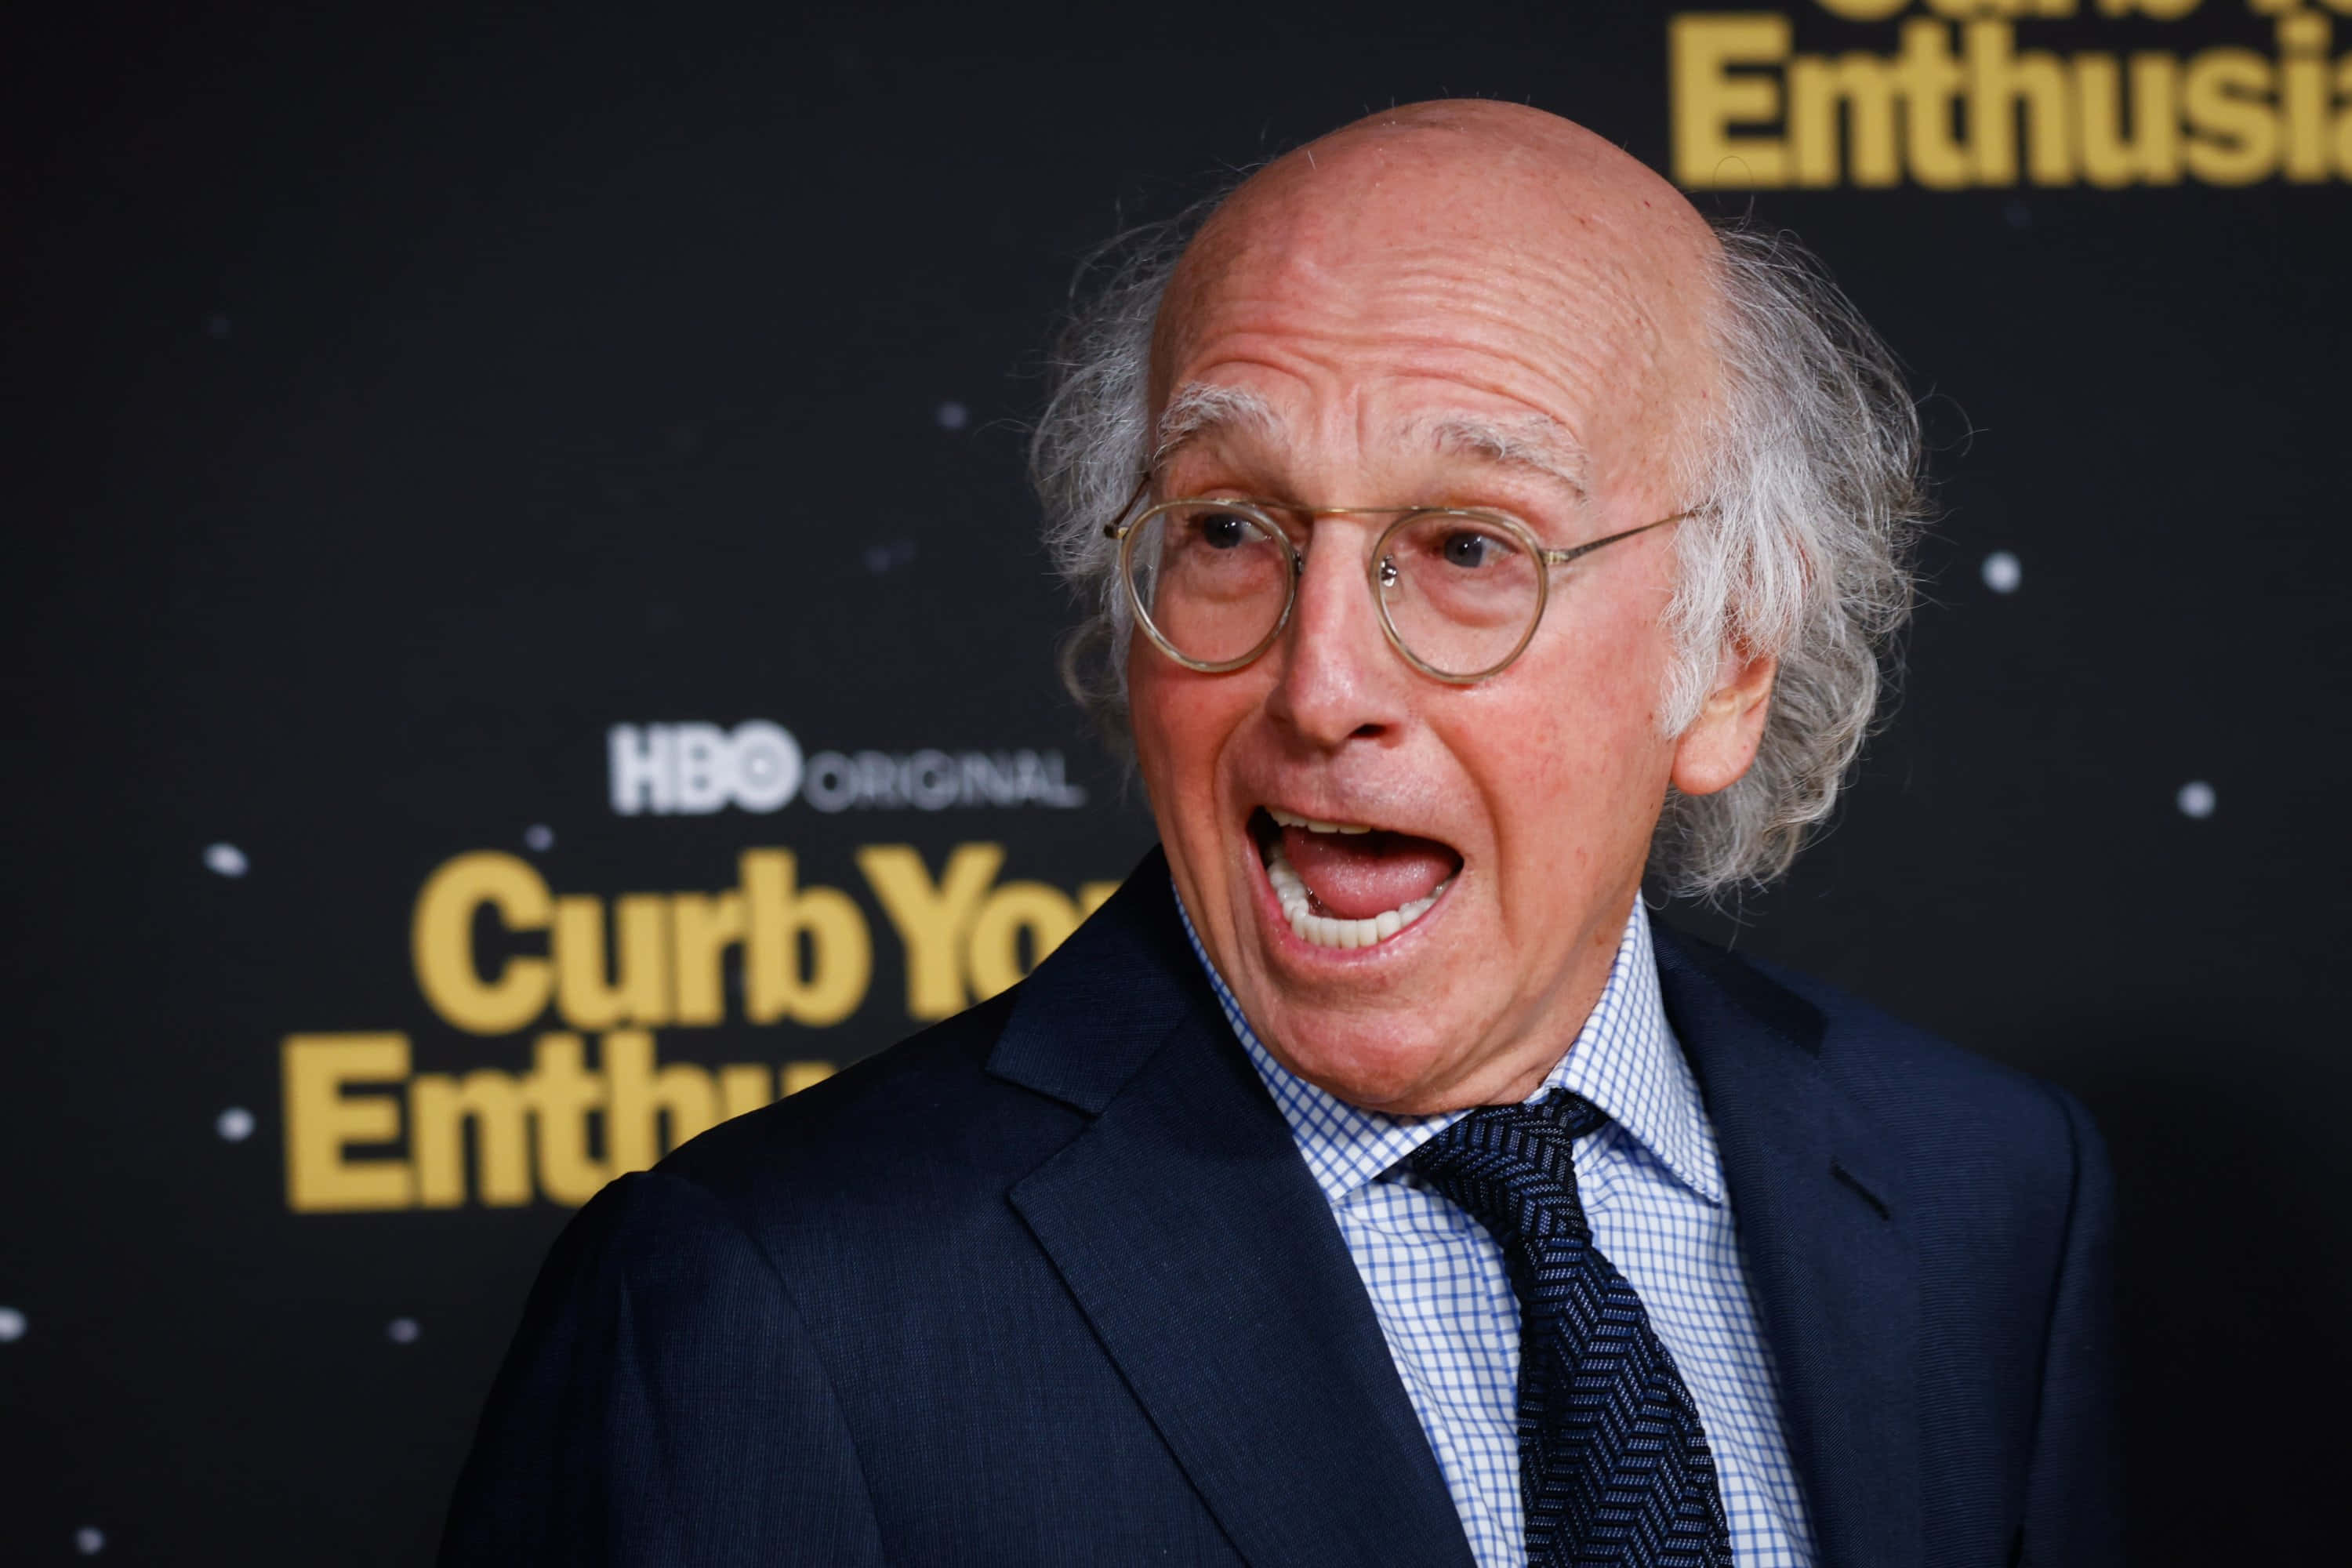 Larry David, famous actor, writer and producer Wallpaper